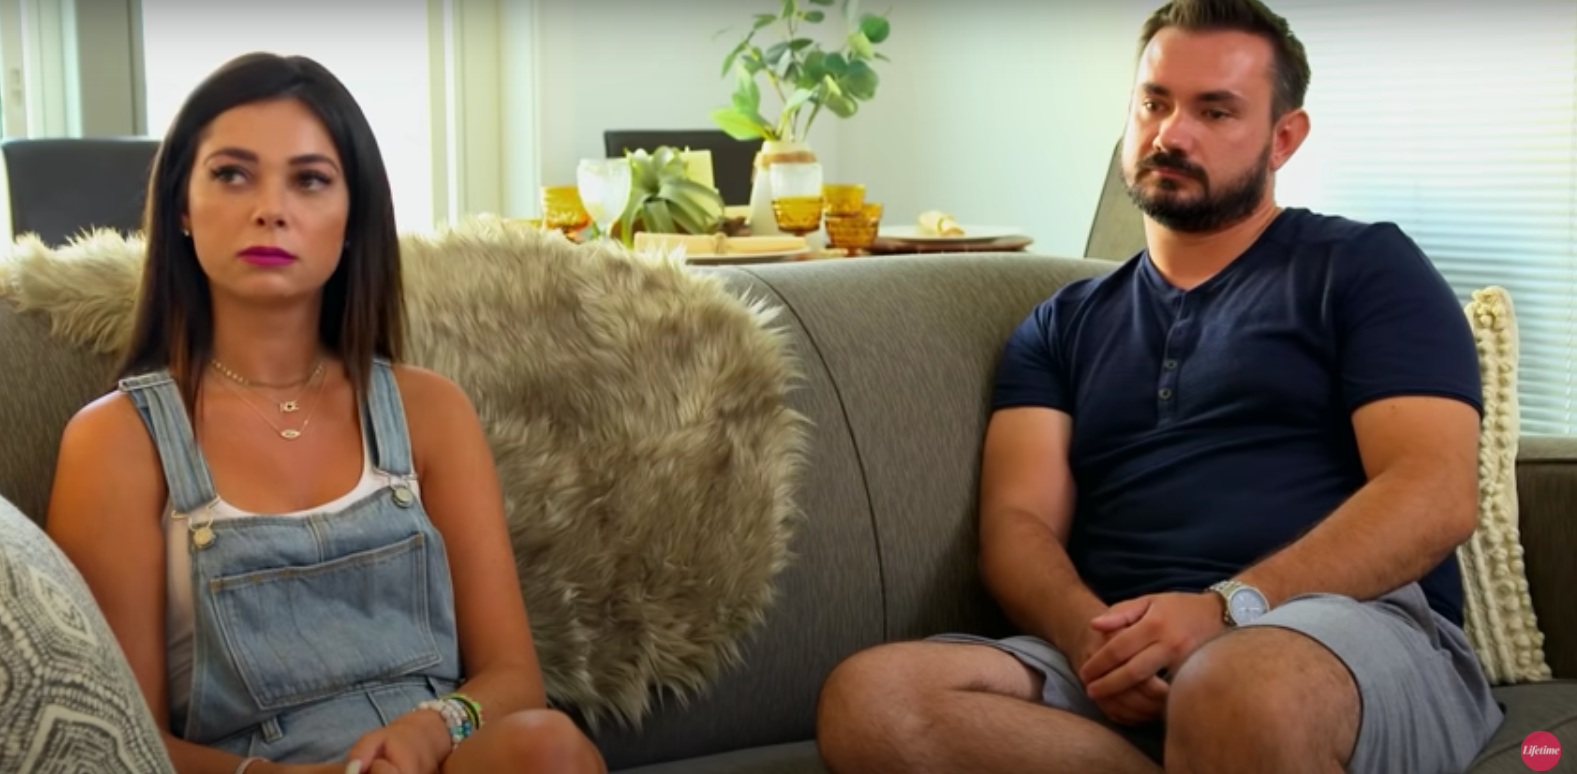 Alyssa and Chris sitting on a couch during an episode of 'Married at First Sight' Season 14